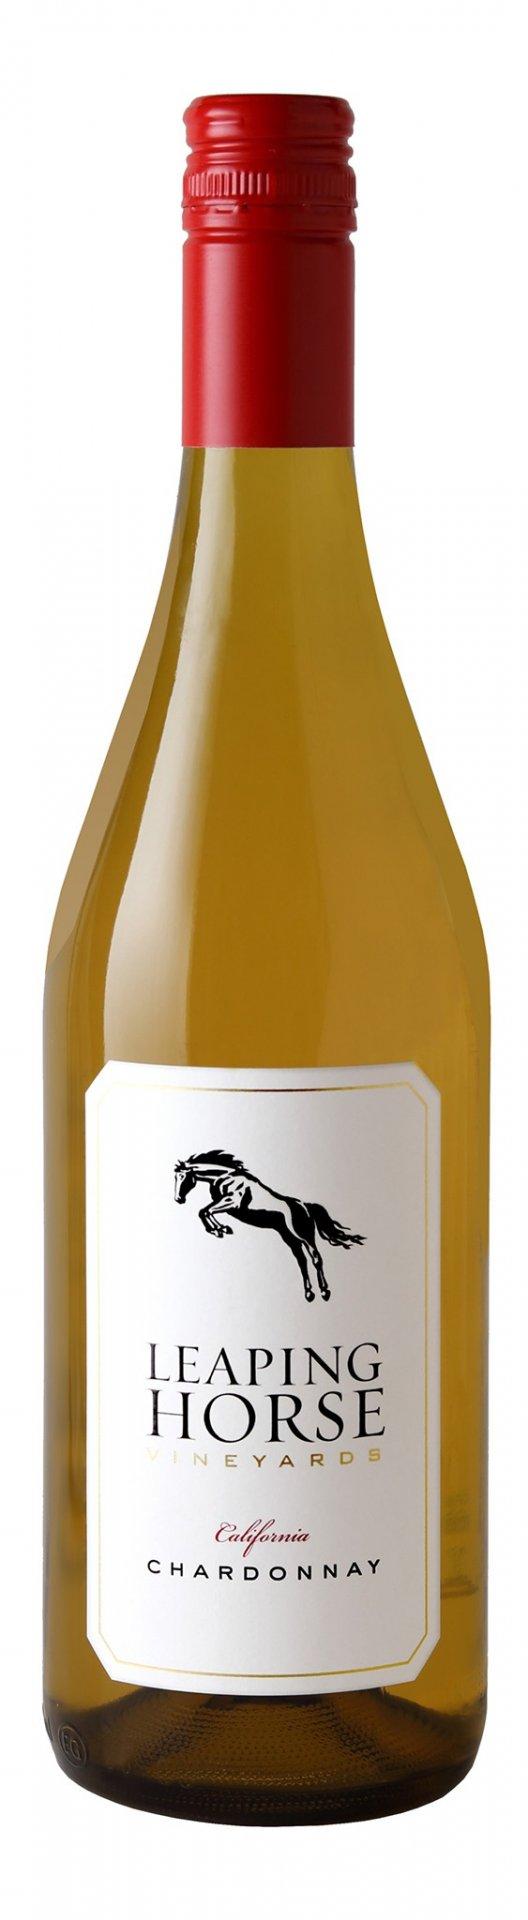 Leaping Horse Chardonnay